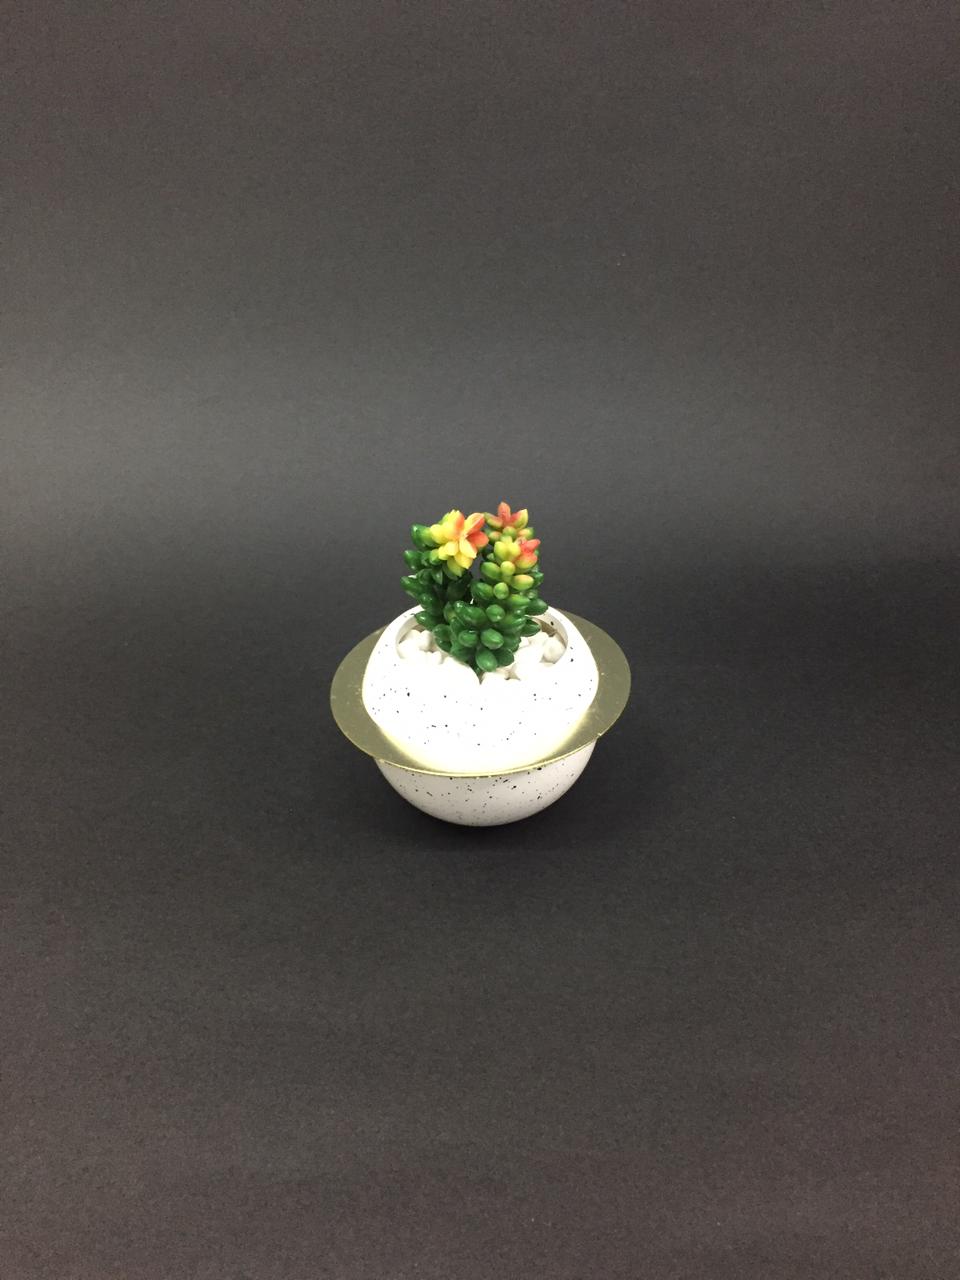 Beautiful White Golden Ring Style Pots With Colorful Succulents By Tamrapatra